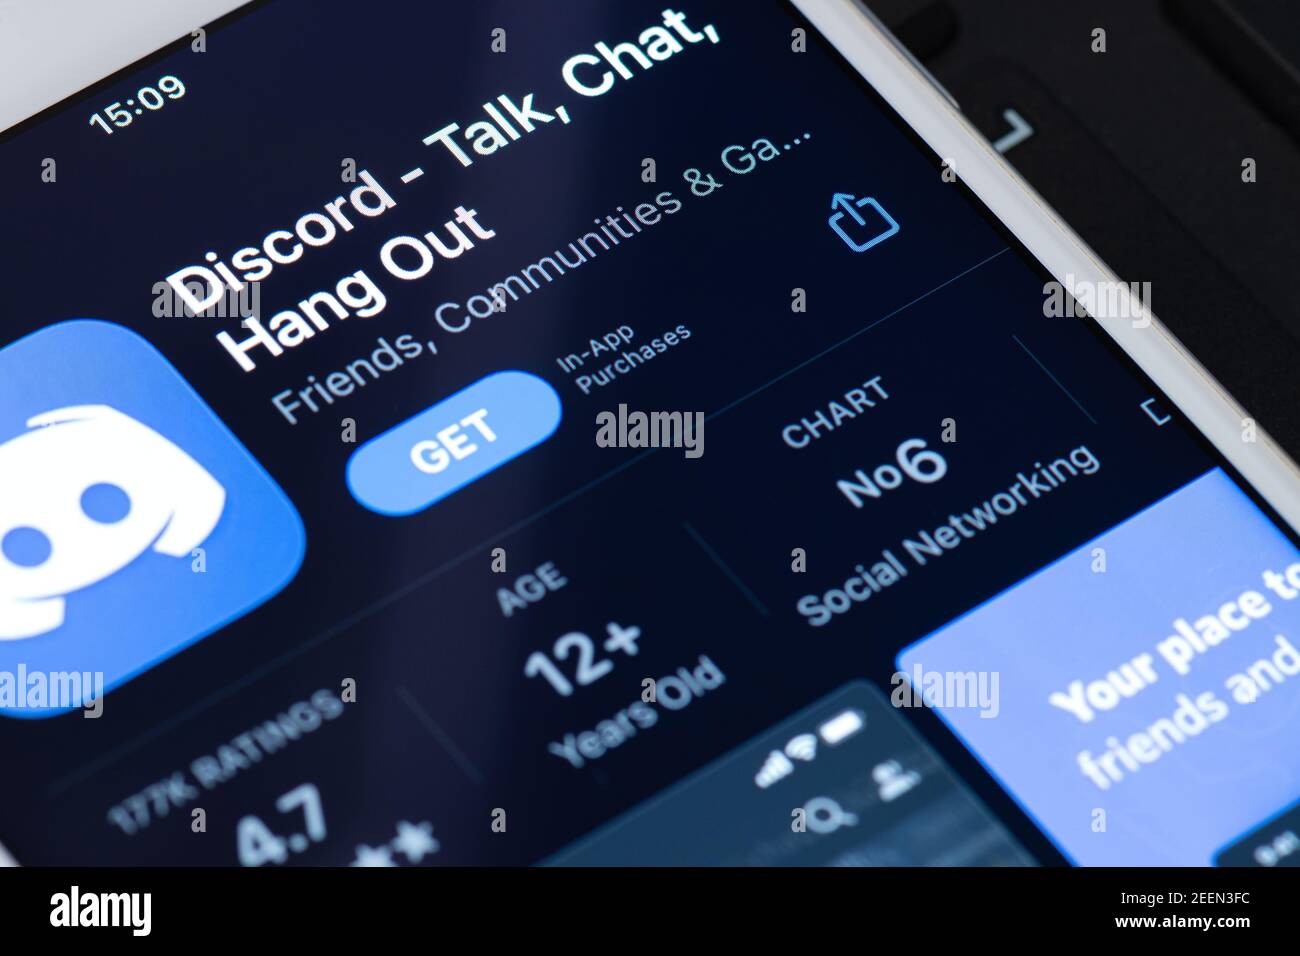 Guilherand-Granges, France - February 08, 2021. Smartphone with Discord app logo. American VoIP, instant messaging and digital distribution platform. Stock Photo